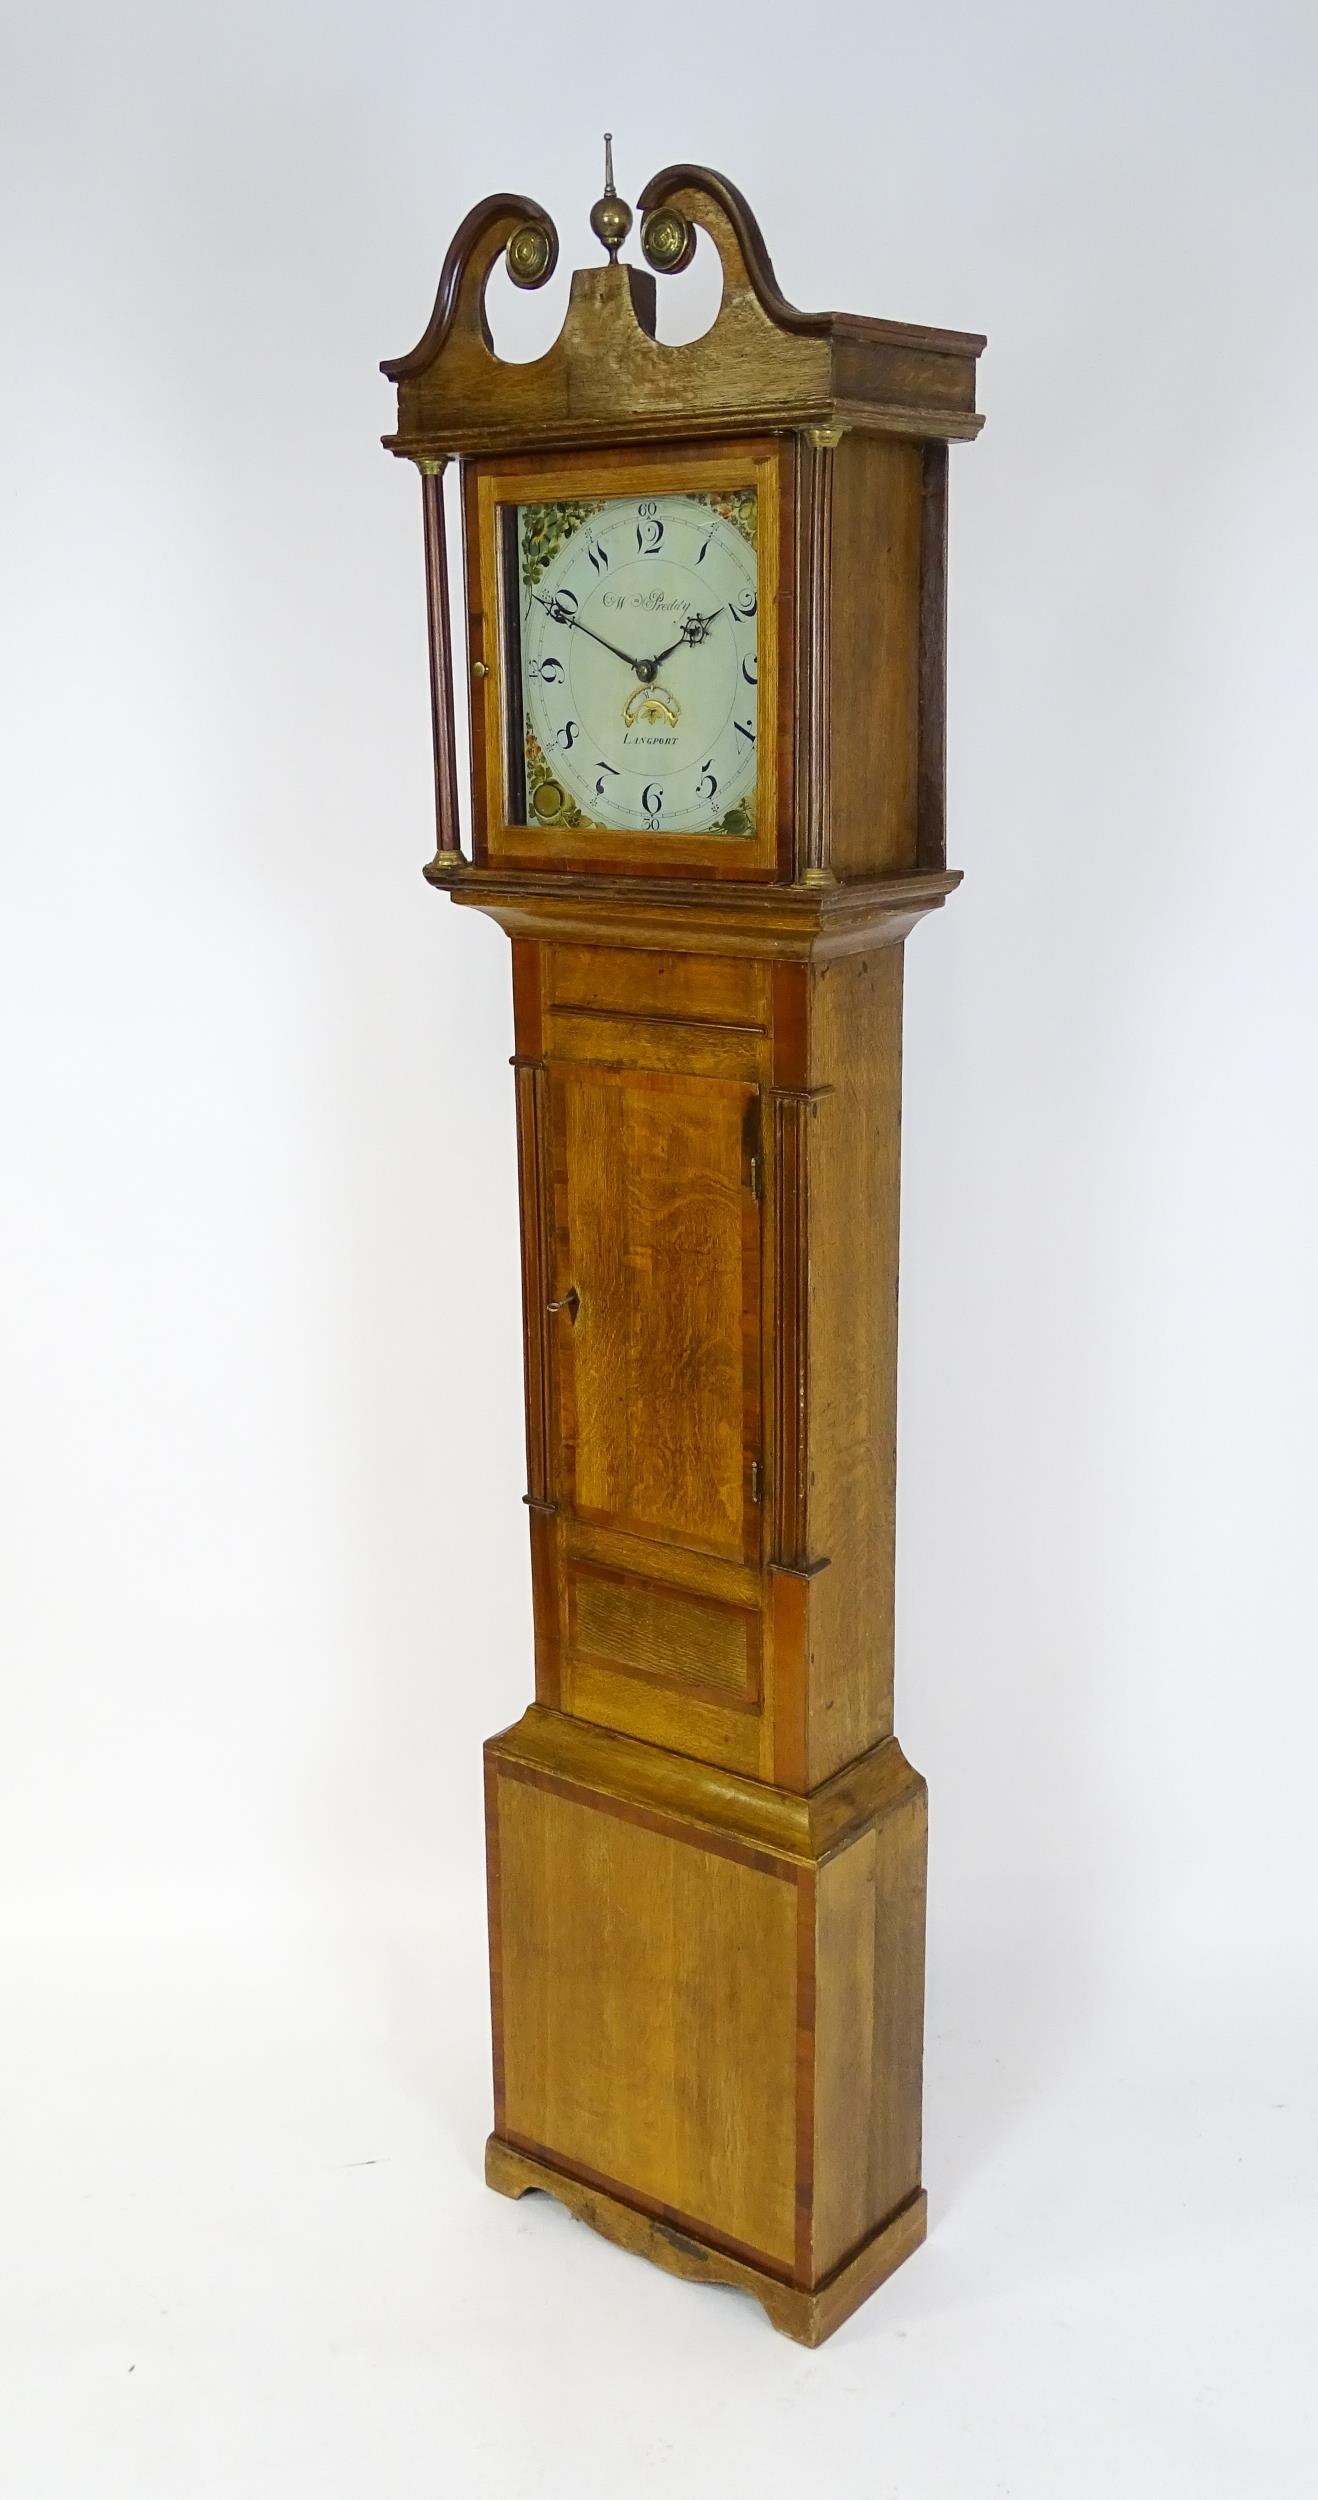 William Preddy, Langport : A 19thC oak cased 30 hour longcase clock with walnut crossbanding, the - Image 4 of 15